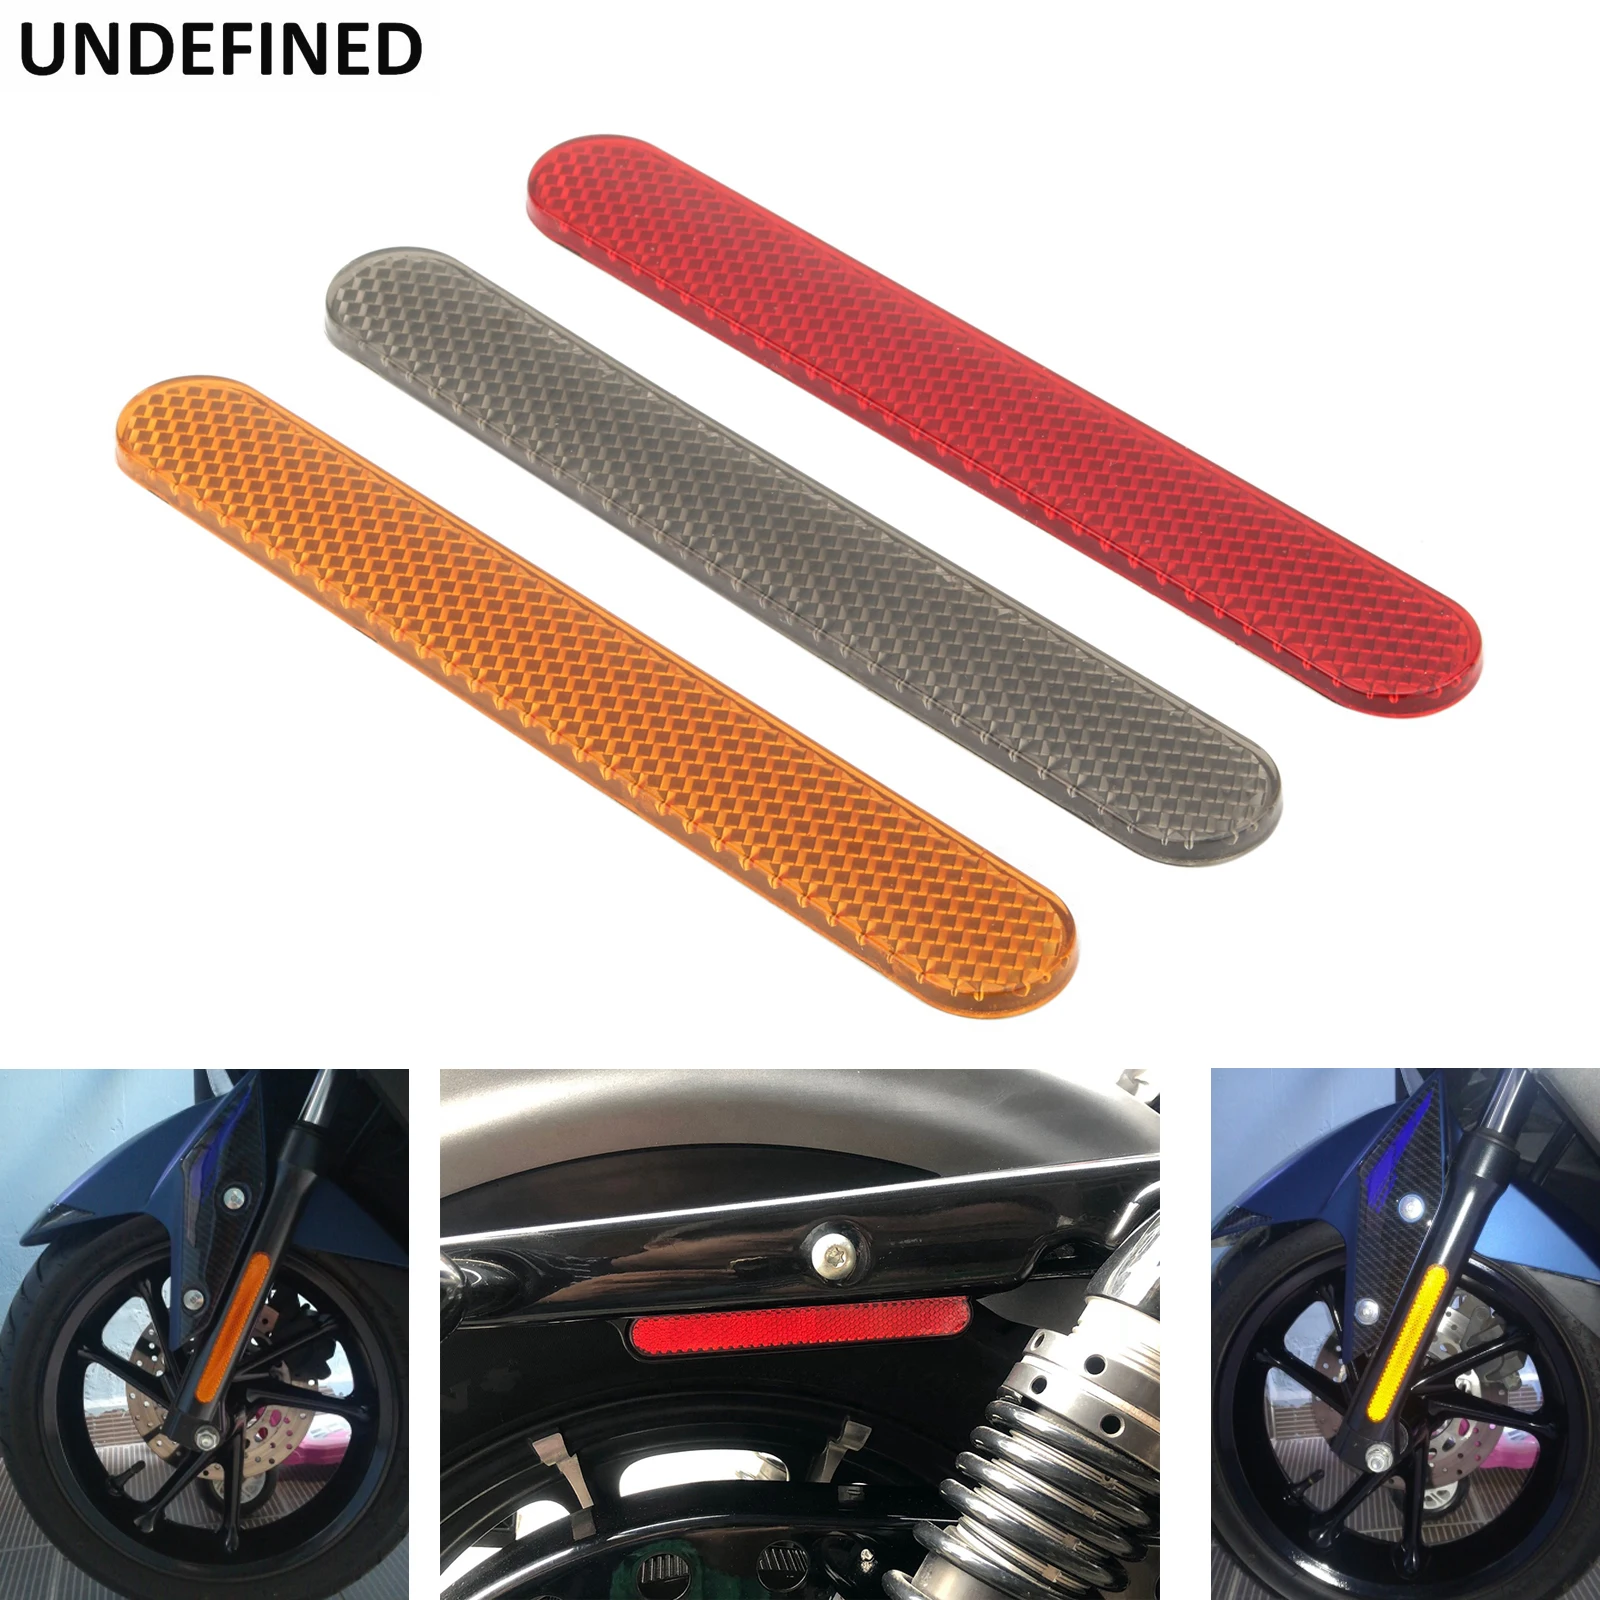 

2PCS Motorcycle Reflector Sticker Saddlebag Latch Cover Safety Warning For Harley Dyna Softail Sportster 883 XL Fatboy Touring